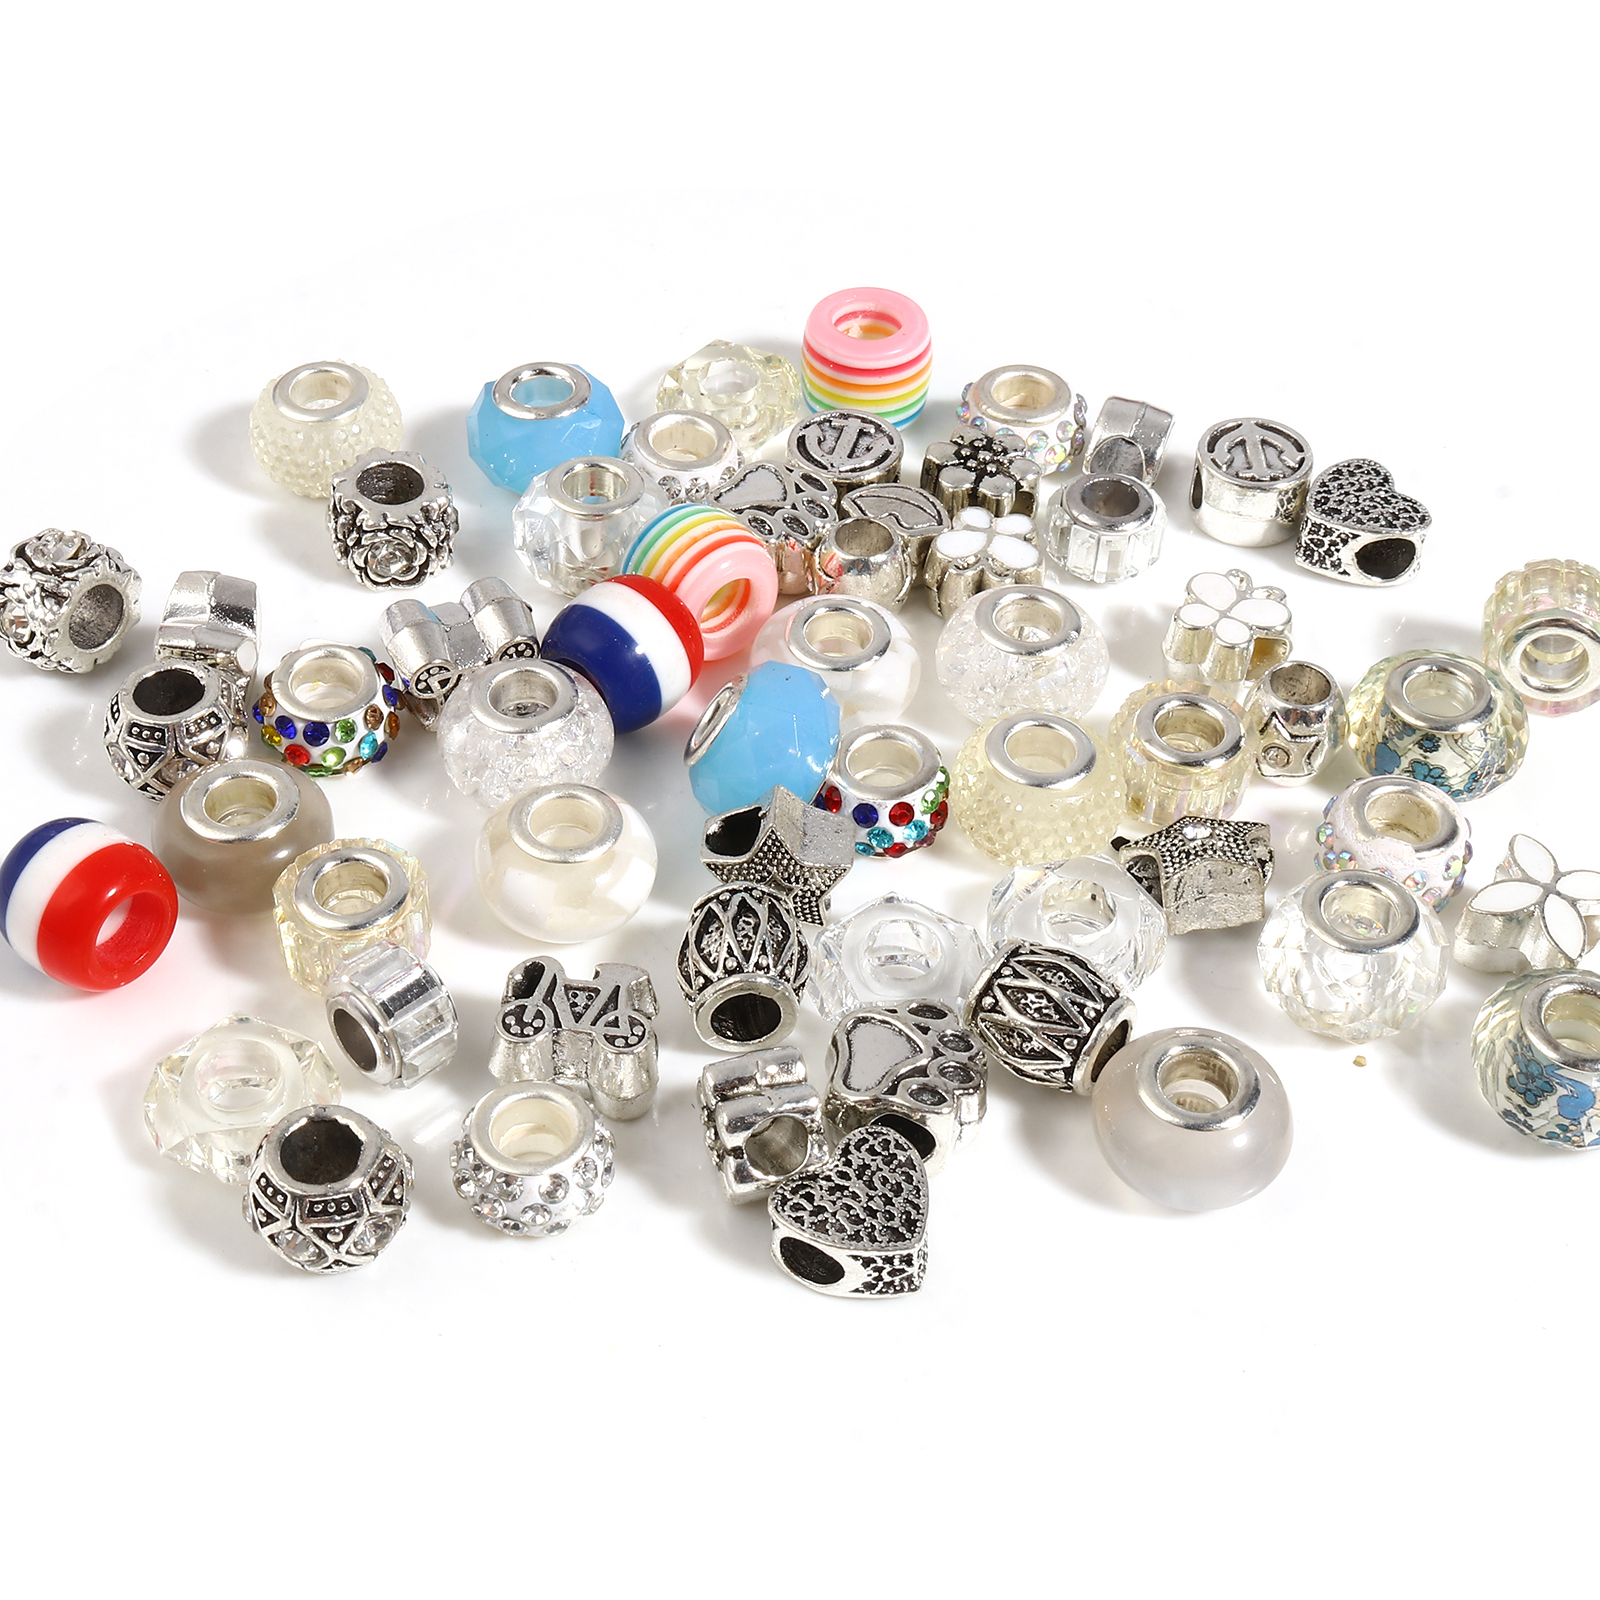 Picture of Zinc Based Alloy & Acrylic Large Hole Charm Beads Silver Tone At Random Color Round 14mm Dia., 9mm x 8mm, Hole: Approx 5.1mm - 4.5mm, 1 Set(60 Pcs/Set)